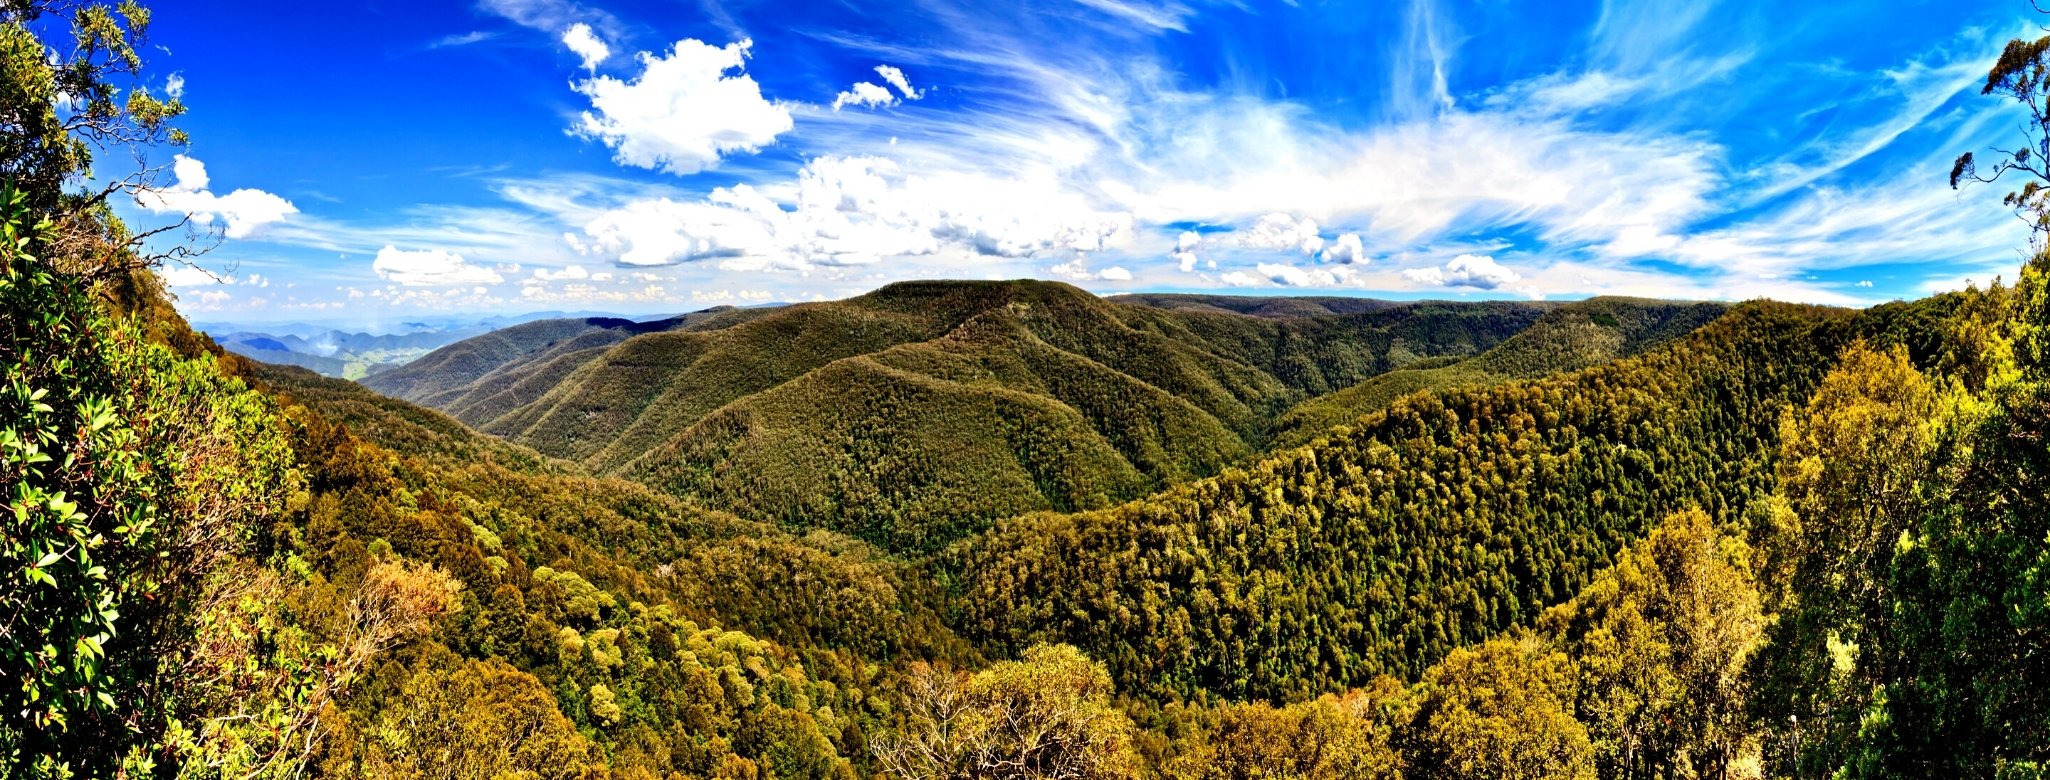 View from Devils Hole in the Barrington Tops National Park, New South Wales